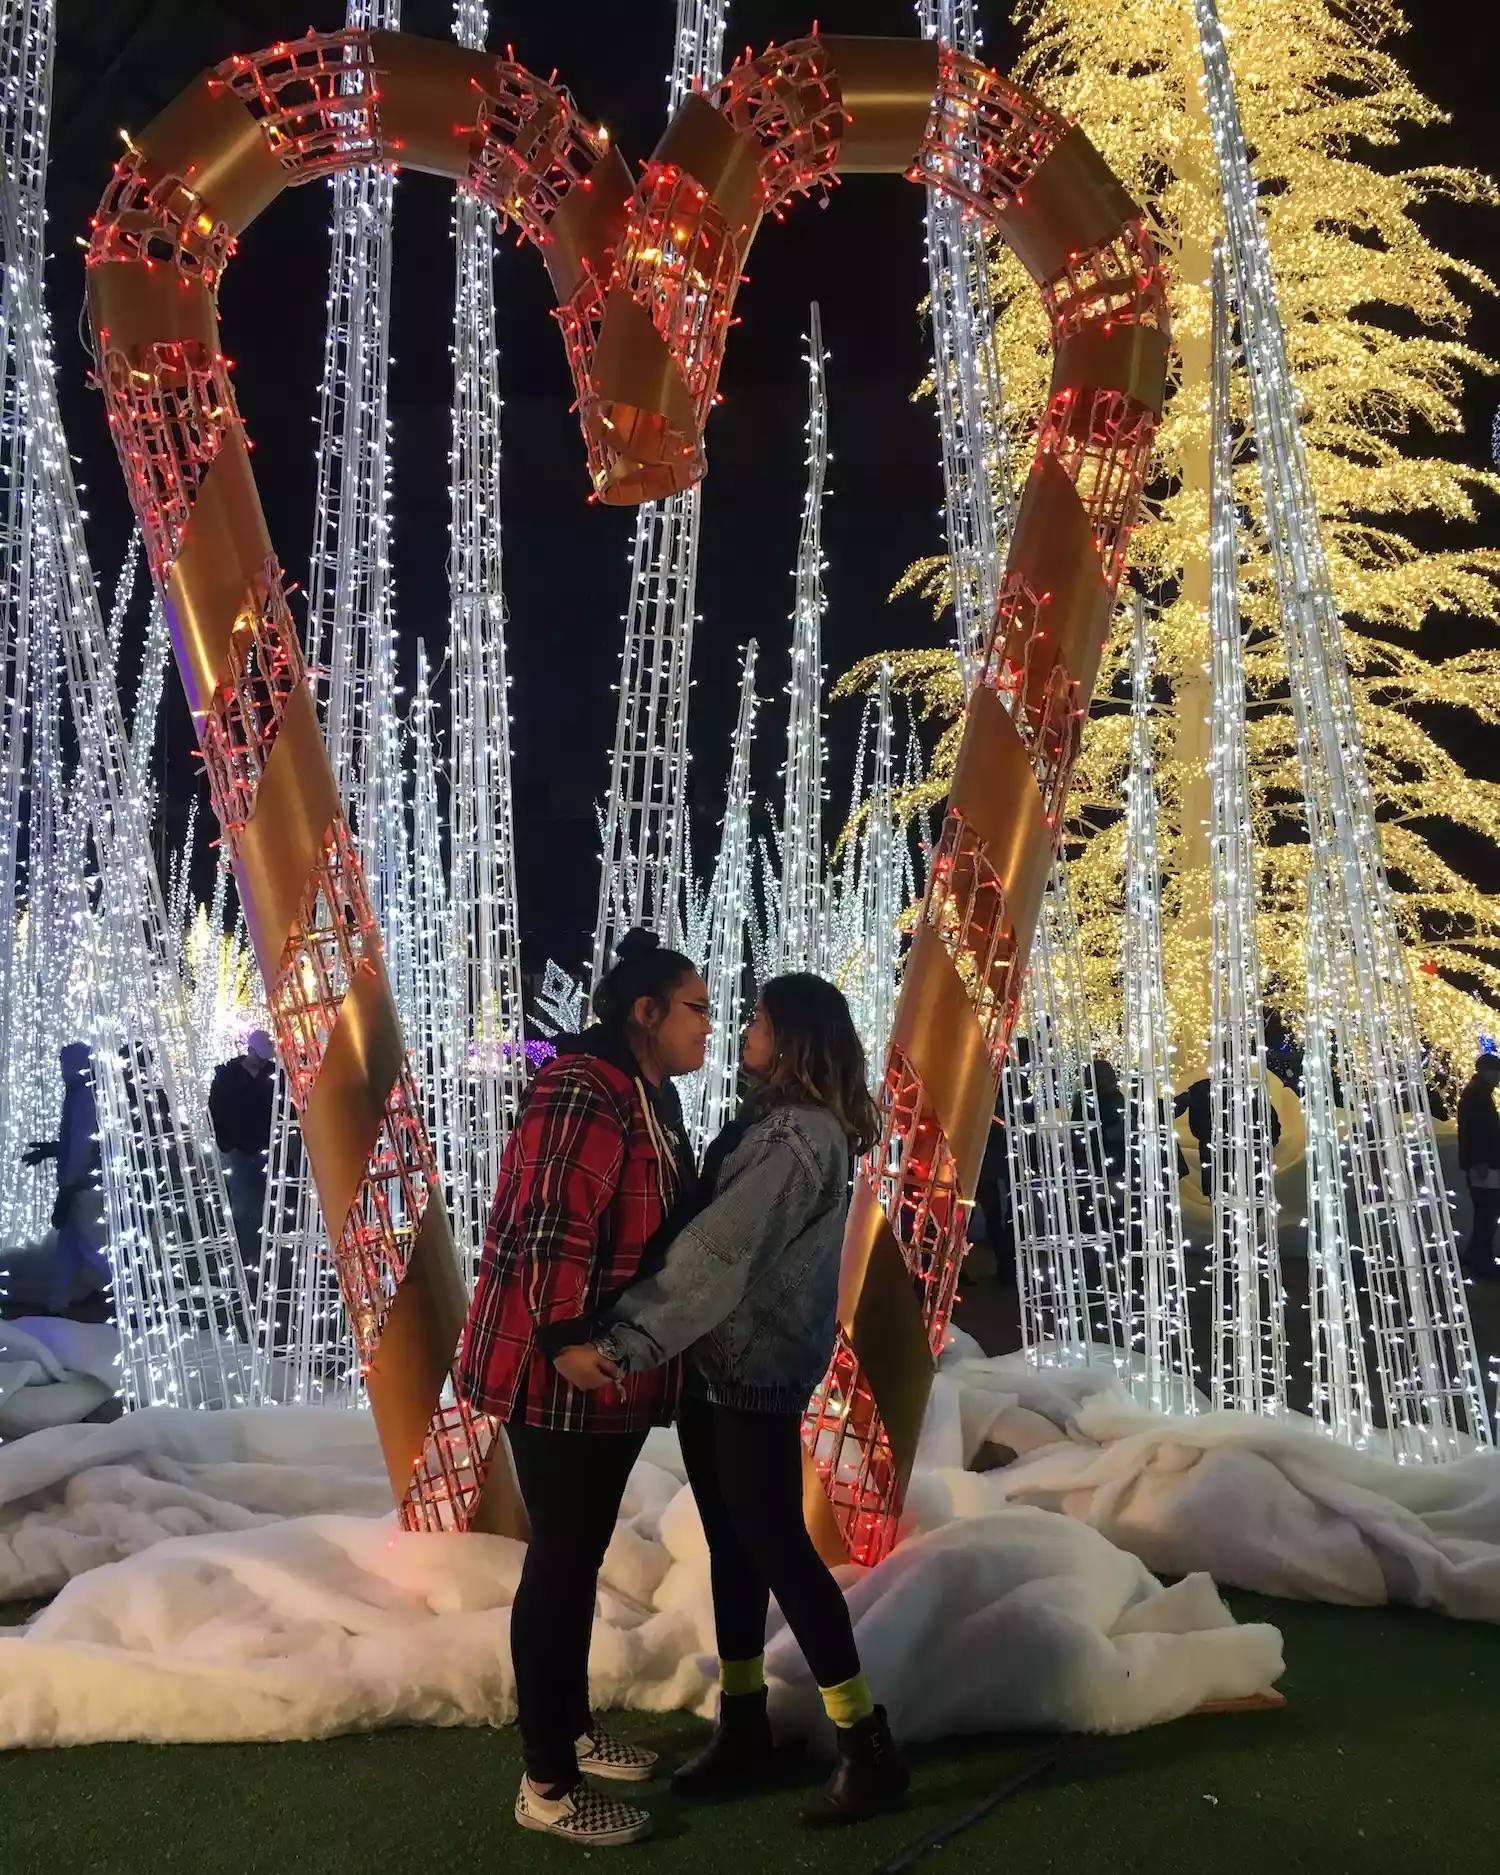 Byrdie writer Aleenah Ansari and her fiancee pose by a heart-shaped holiday lights pop-up